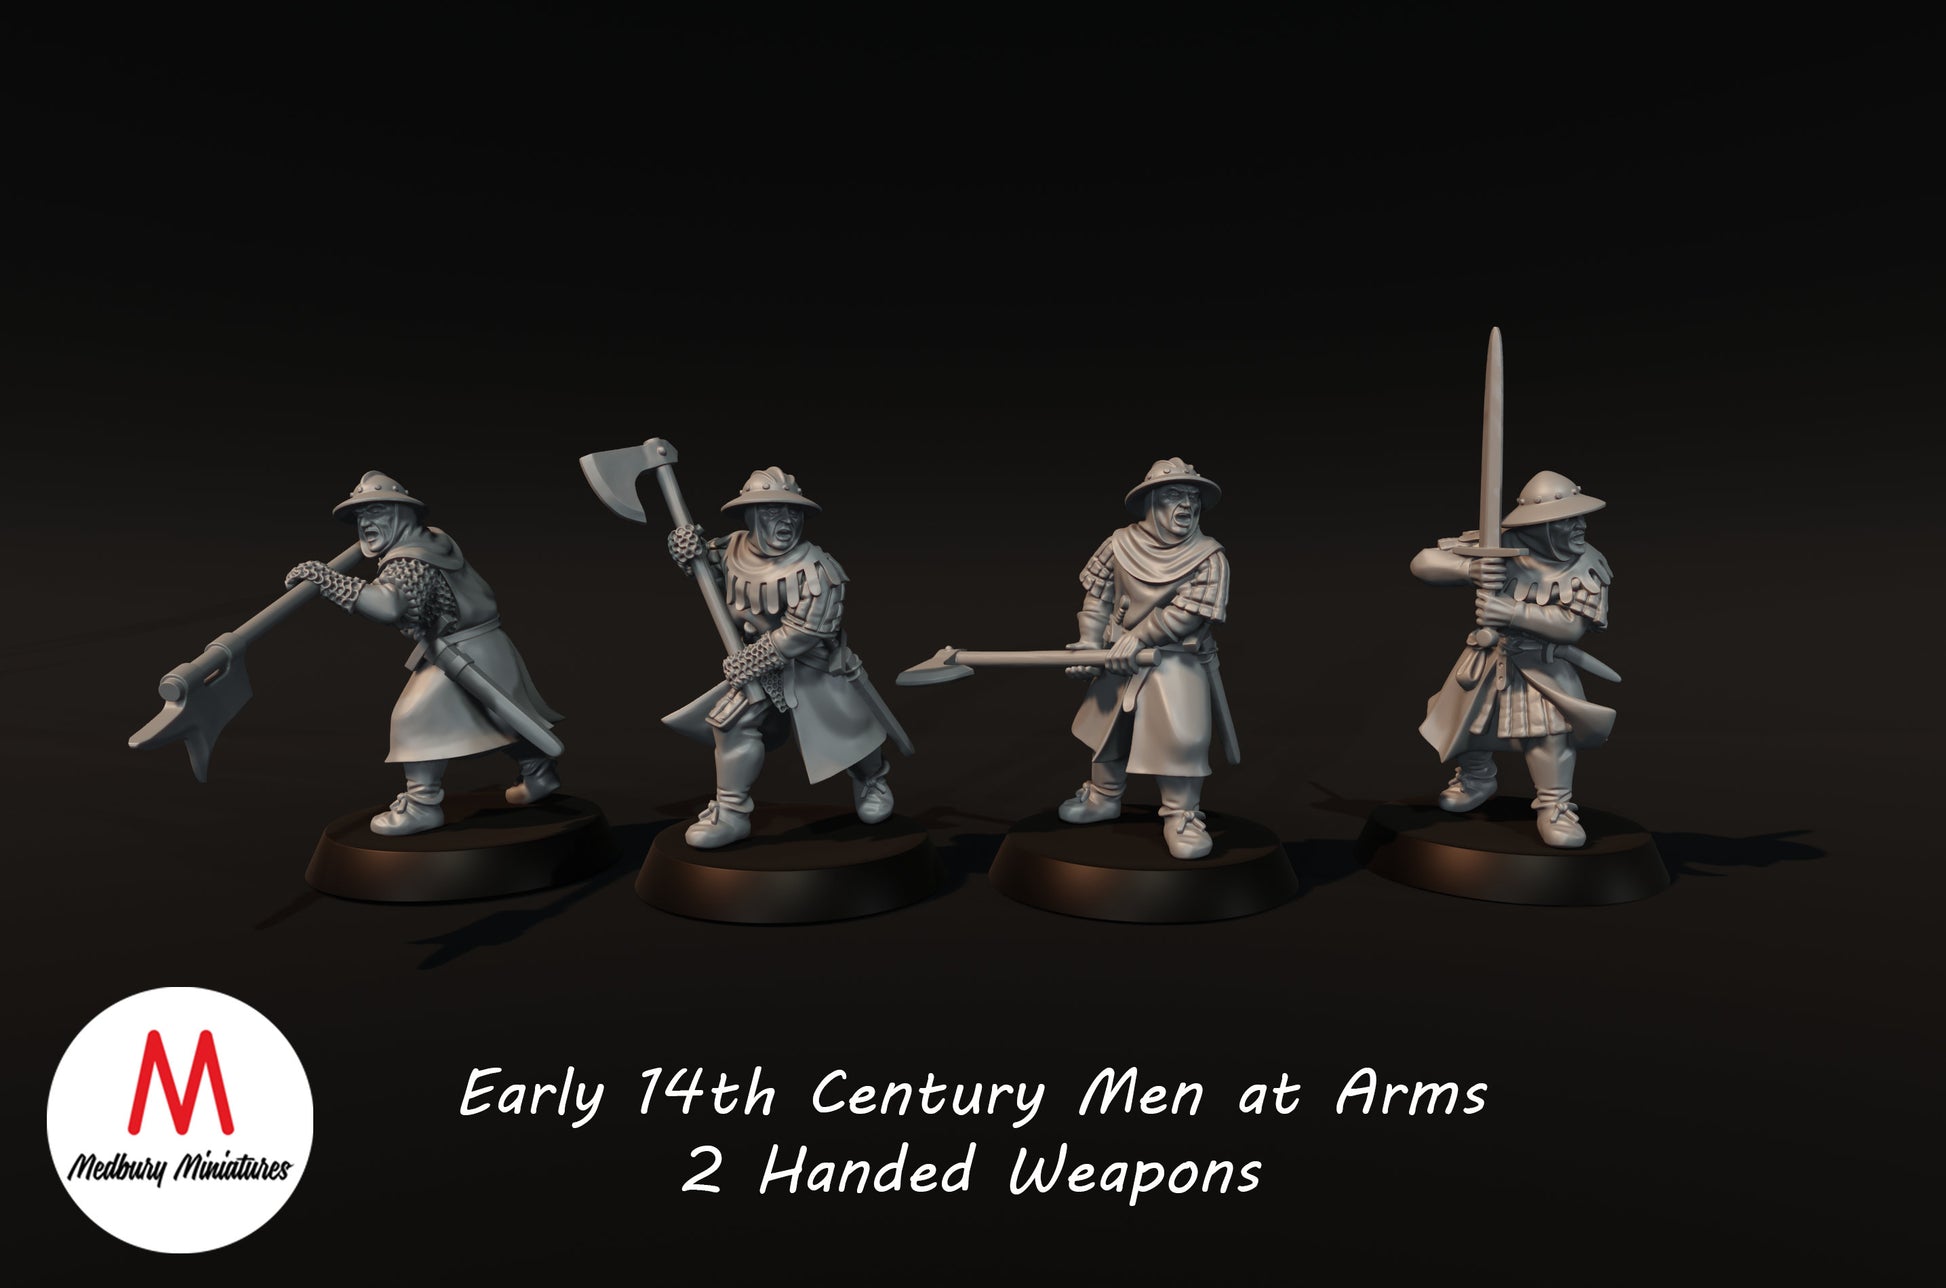 14th Century Men at Arms with Two Handed Weapons